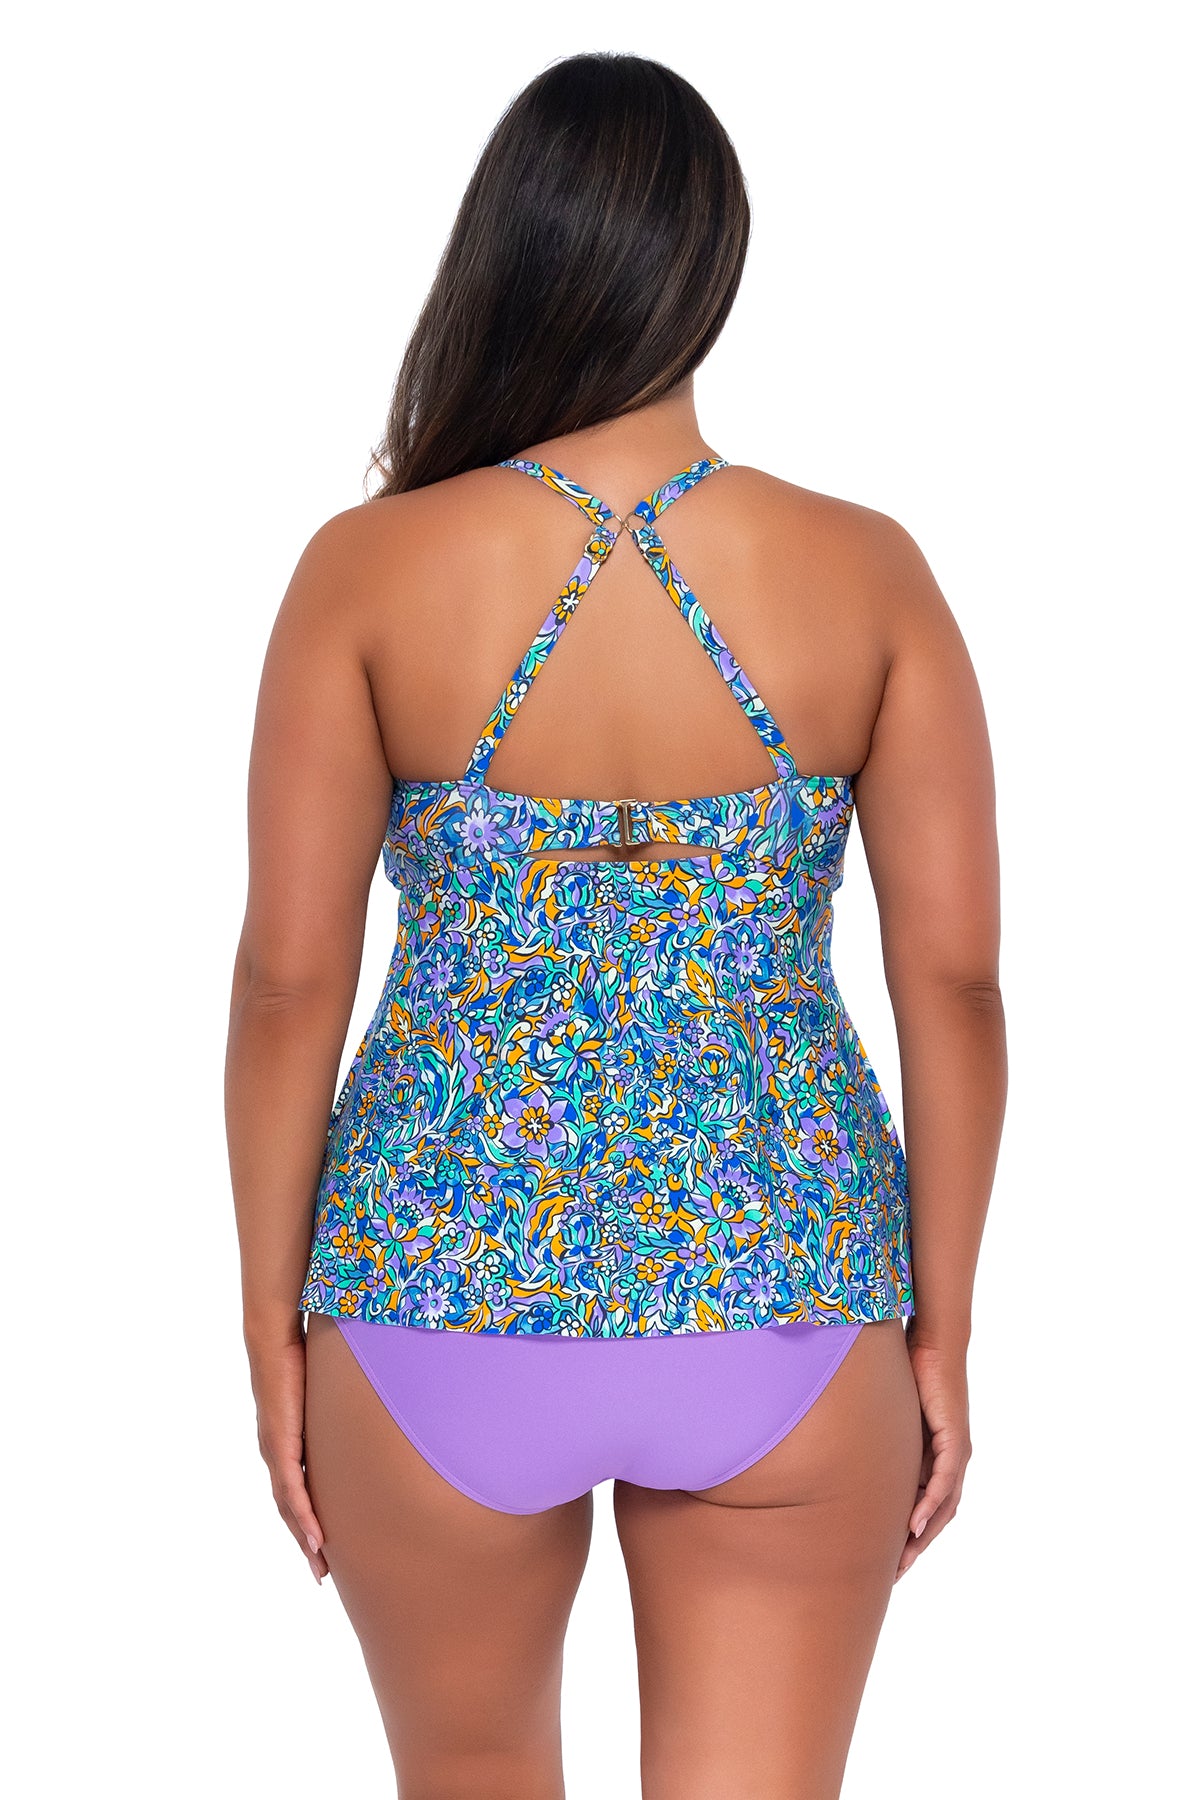 Back pose #1 of Nicky wearing Sunsets Escape Pansy Fields Tori Tankini Top showing crossback straps with matching Hannah High Waist bikini bottom